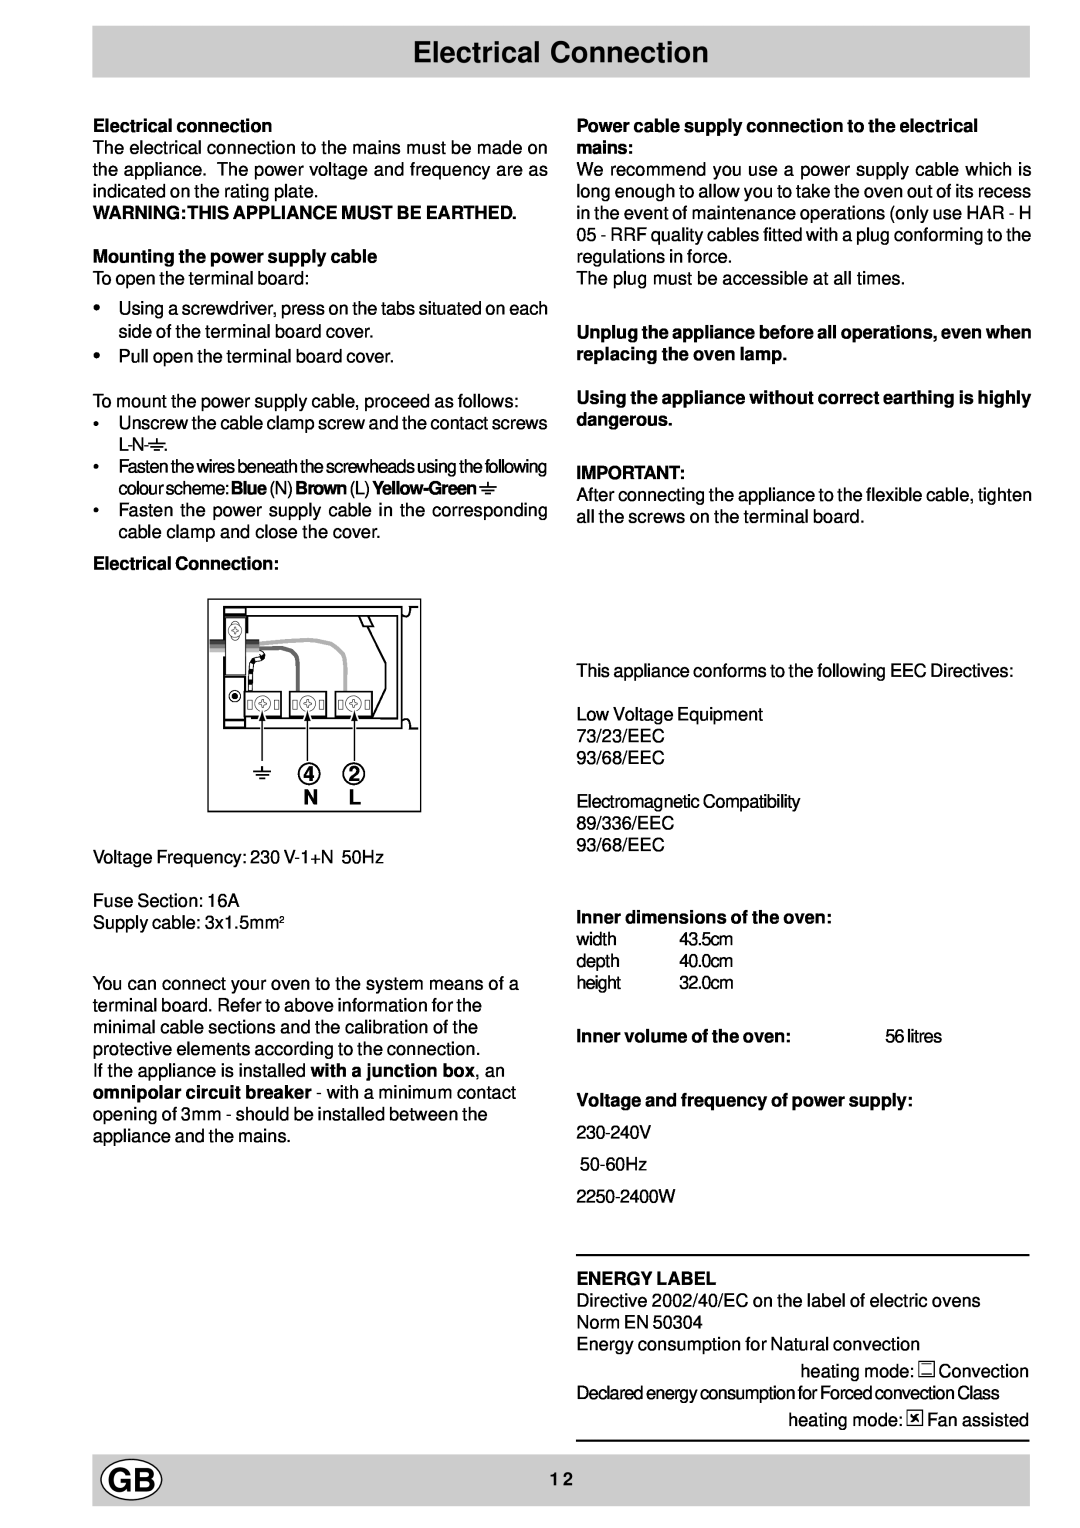 Hotpoint ST55X - ST52 Electrical Connection, 4 2 N L, Electrical connection, Inner dimensions of the oven, Energy Label 